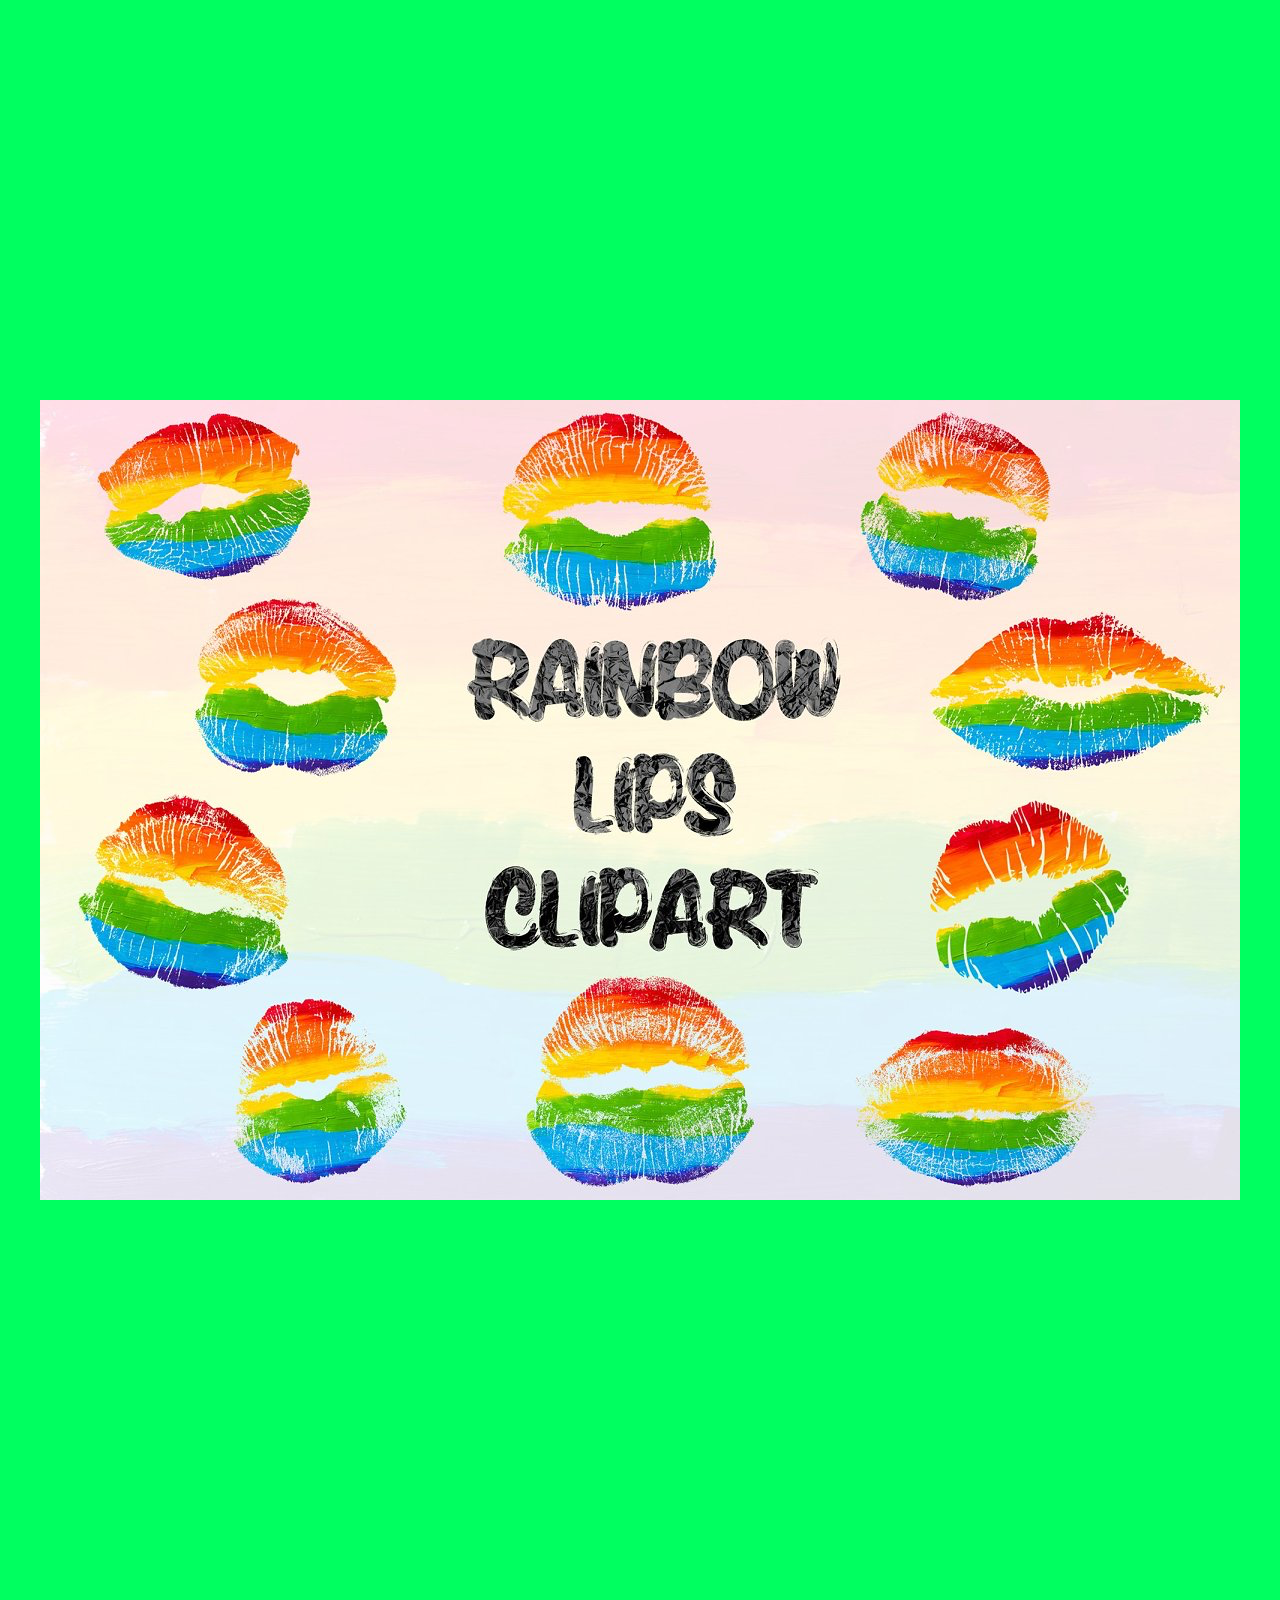 Rainbow lips lgbt pride clipart pinterest image preview.